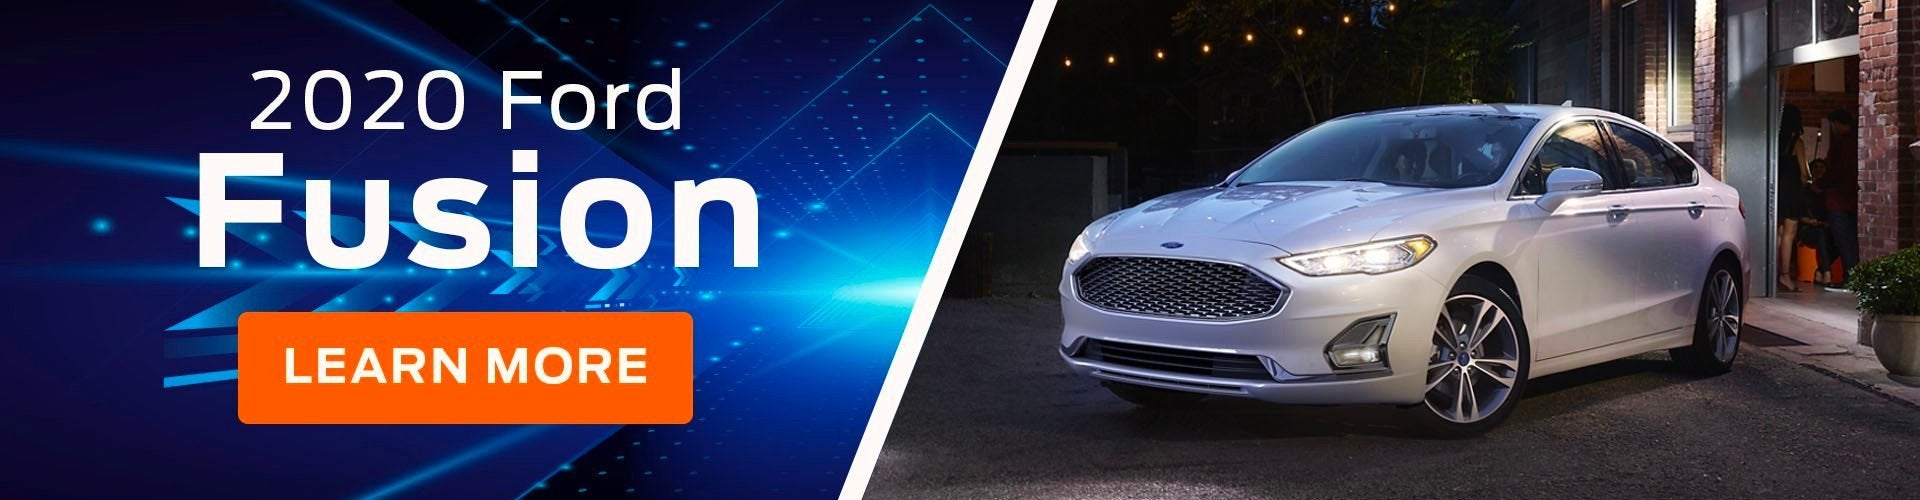 2020 Ford Fusion: Learn More